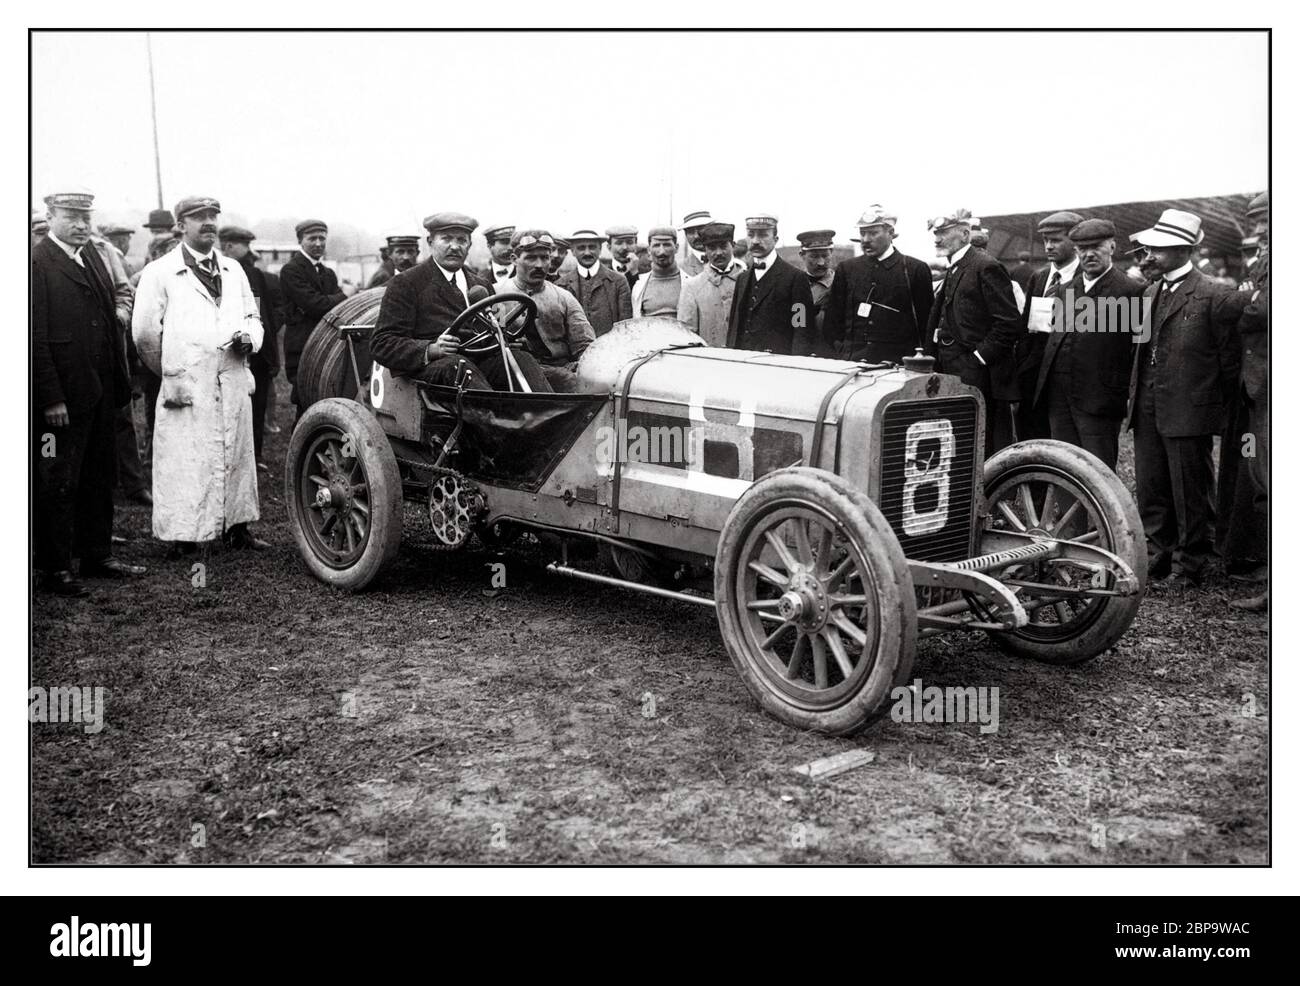 VINTAGE FRENCH GRAND PRIX DIEPPE 1908 Léon Théry, at the 1908 French Grand Prix The 1908 French Grand Prix was a Grand Prix motor race held at Dieppe France on 7 July 1908.  Official name Grand Prix de l'Automobile Club de France.  No.8 Car featured is a ‘Brasier’ a French automobile manufacturer, based in the Paris area, and active between 1905 and 1930.The firm began as Richard-Brasier in 1902, and became known as Chaigneau-Brasier in 1926. Théry,  French GP at Dieppe (GP de l'A.C.F.) 1908, DNF. Stock Photo